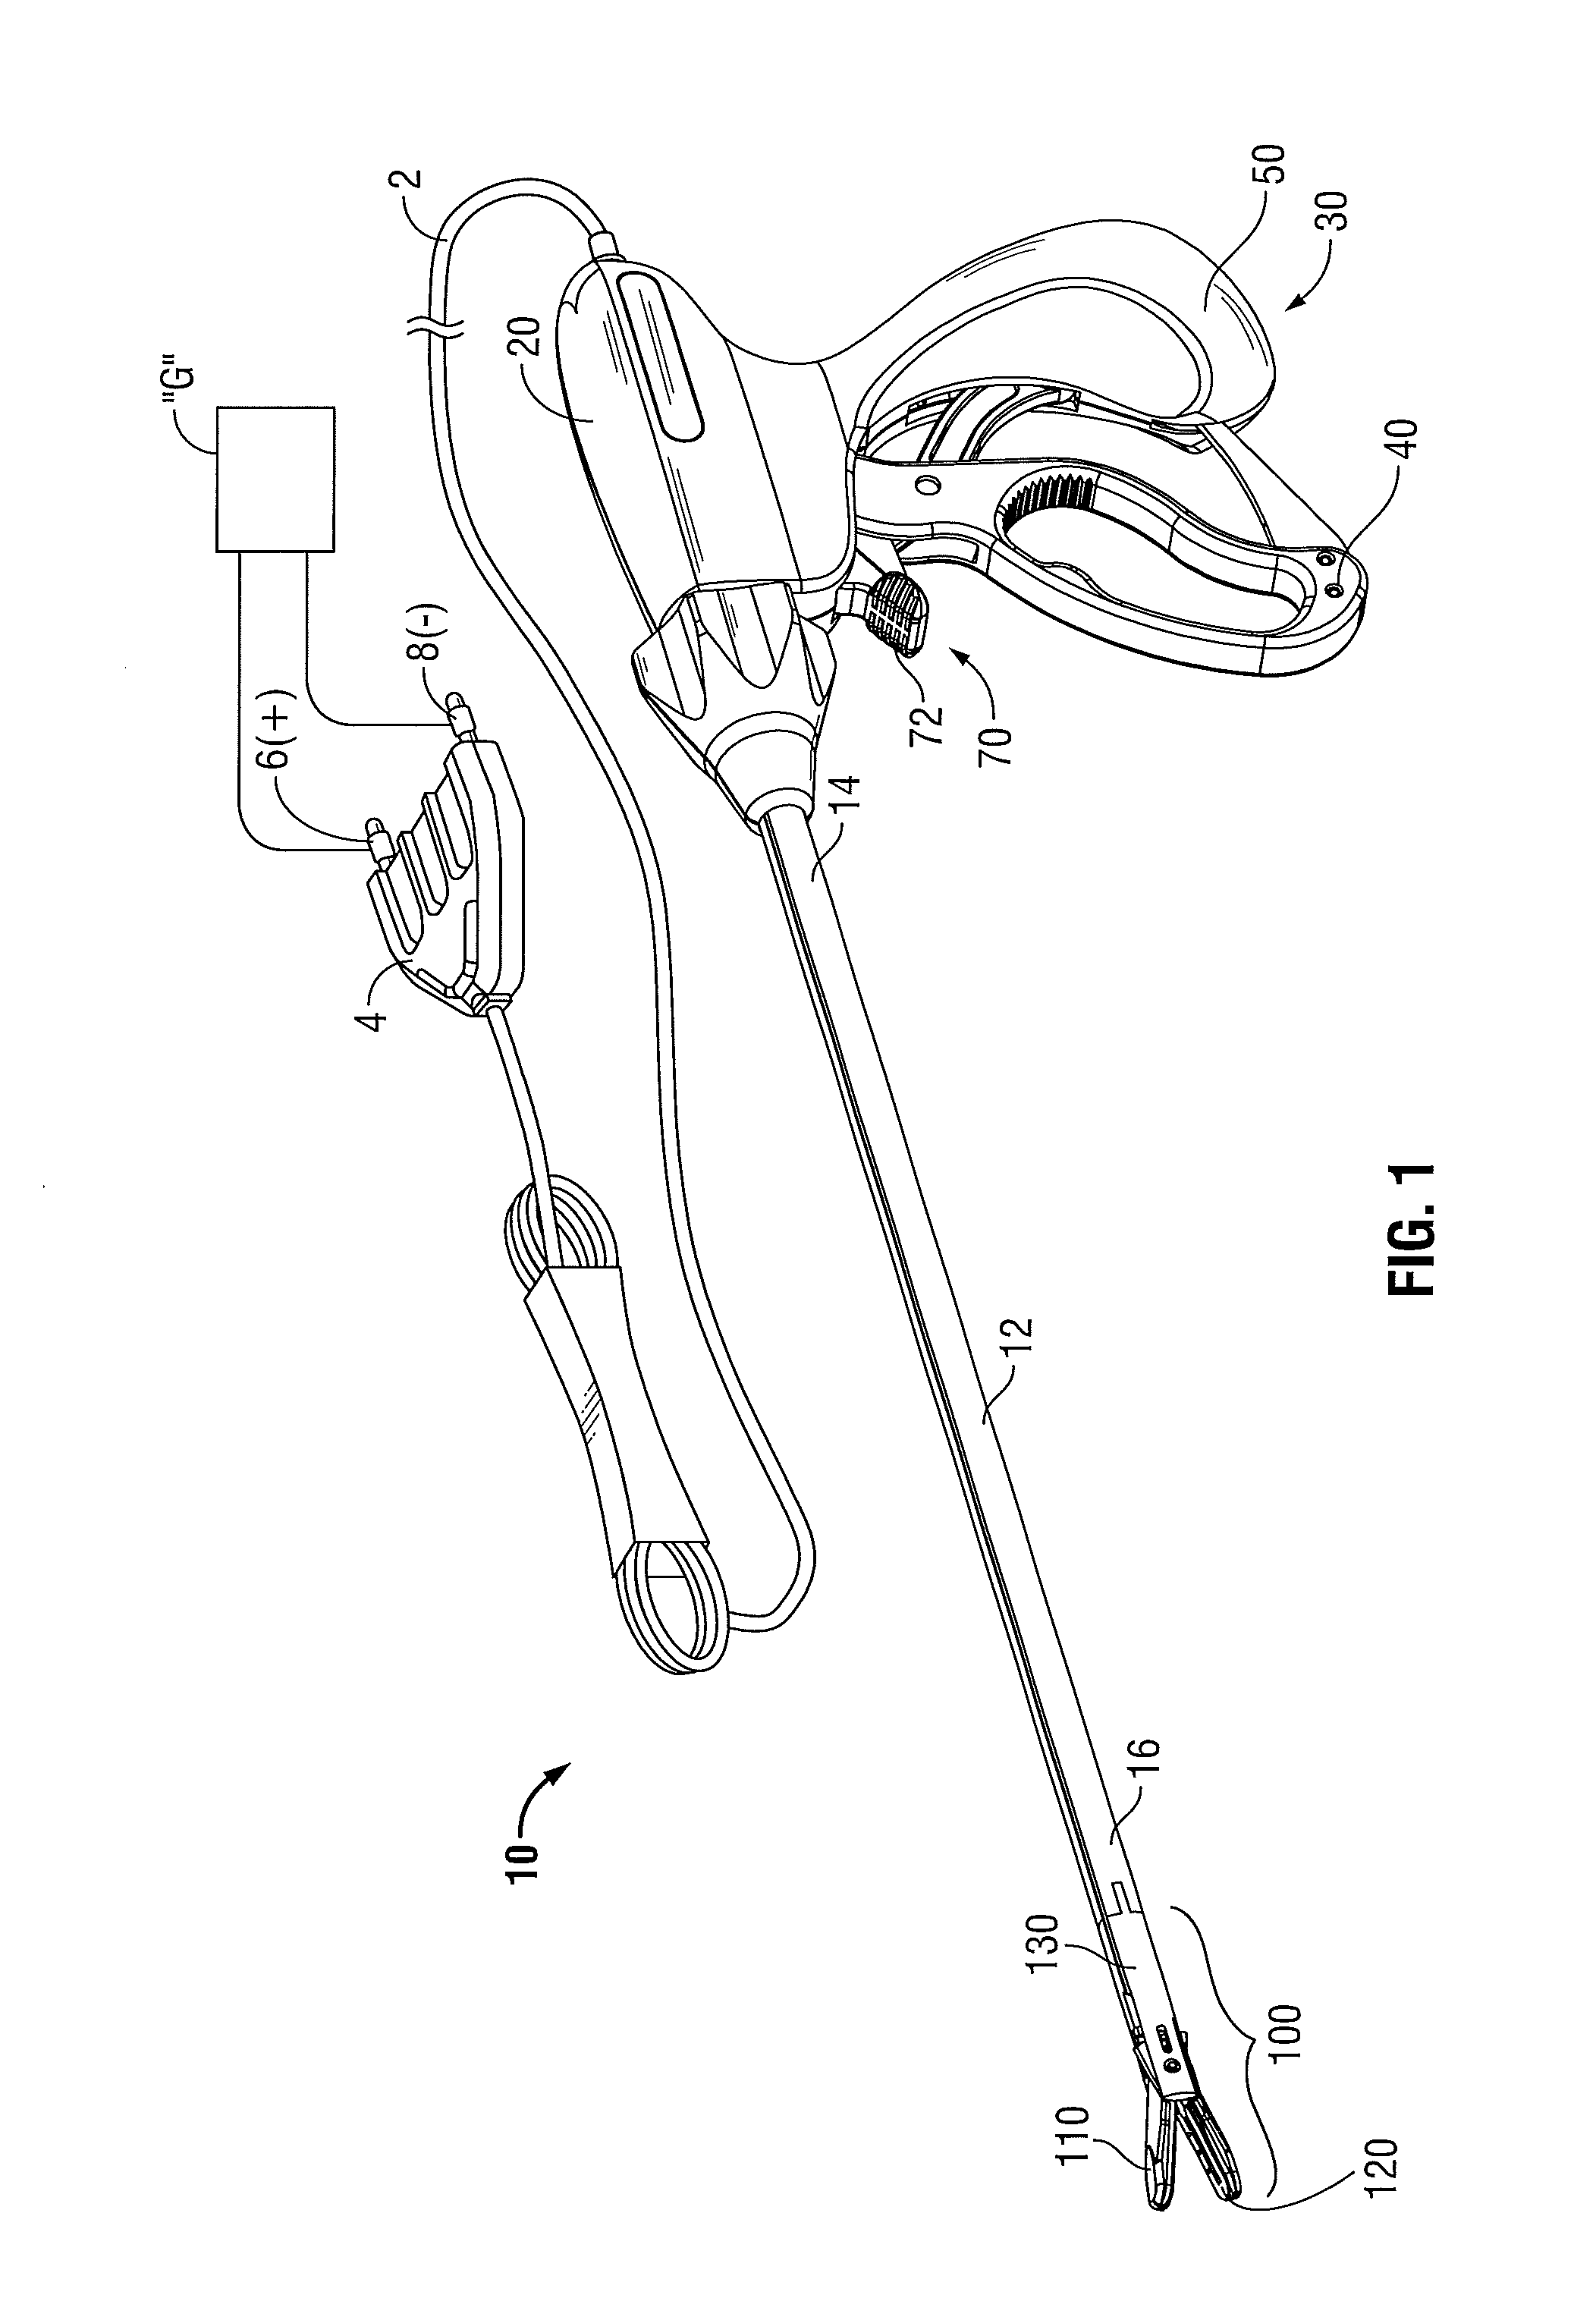 Surgical forceps including reposable end effector assemblies